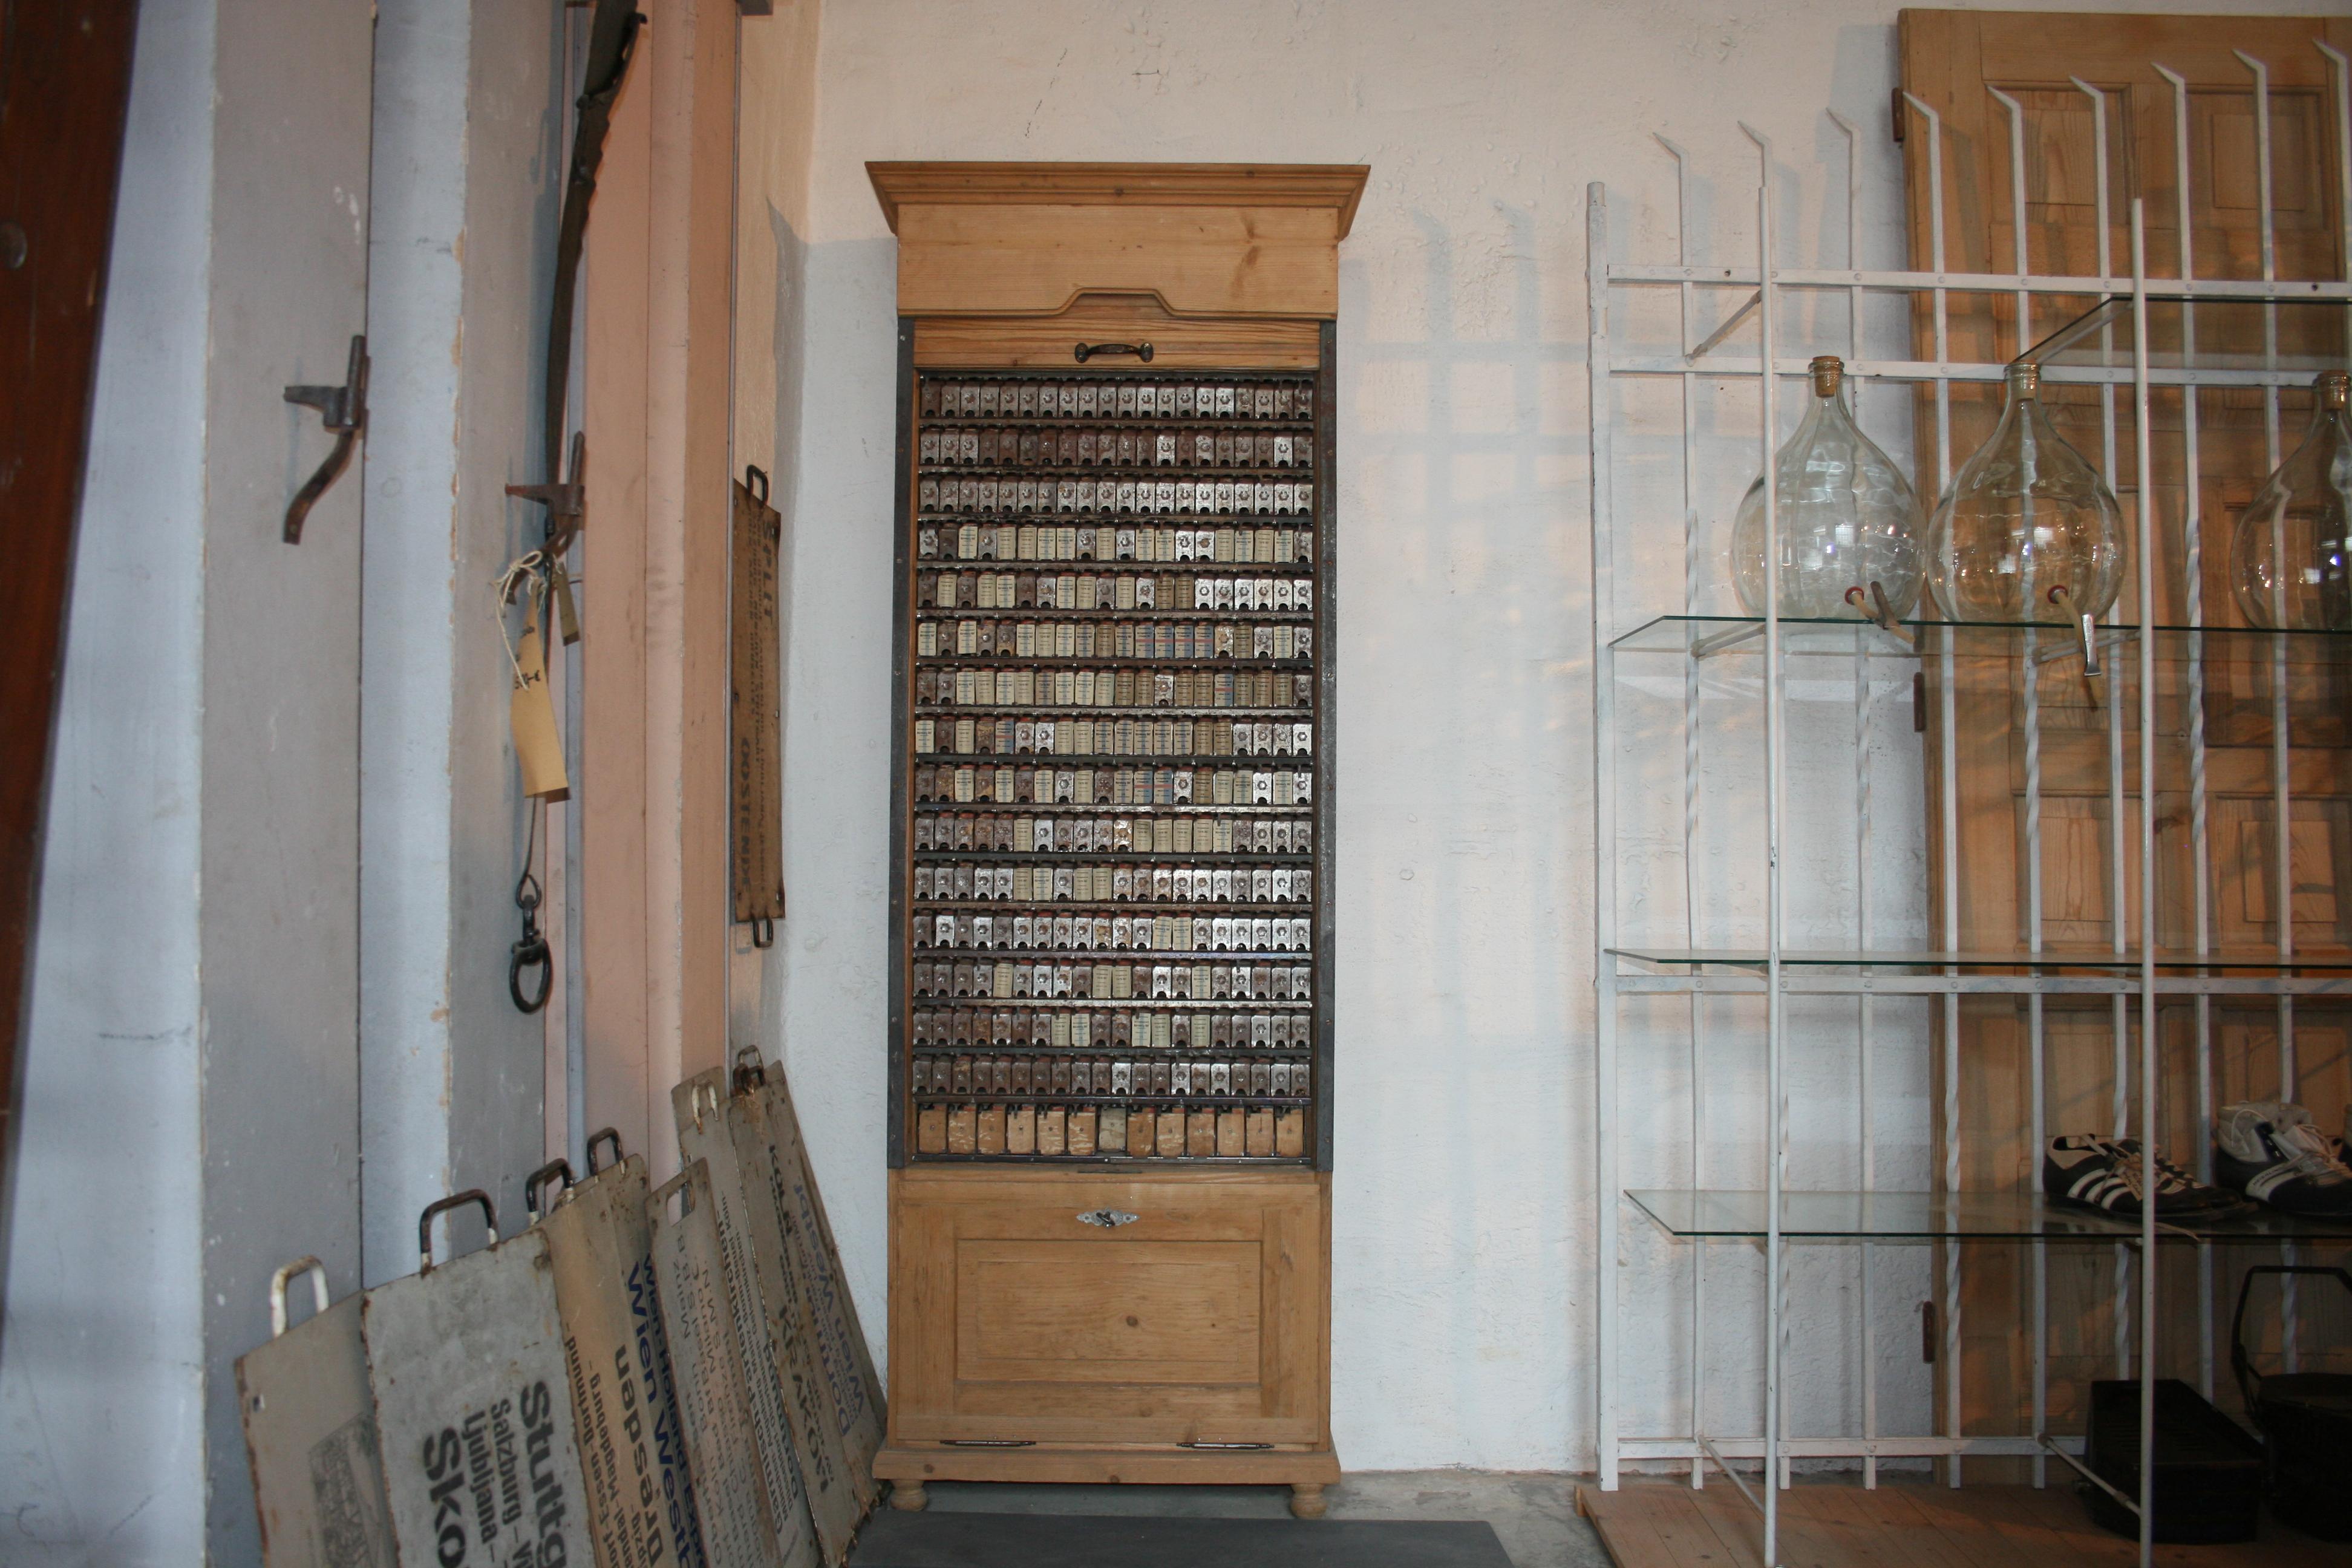 Extremely rare original old train station ticket cabinet from Germany, made of softwood and metall. Behind the absolutely functional roller shutters are the metal compartments for the various train tickets (see photos). Underneath is a flap to open